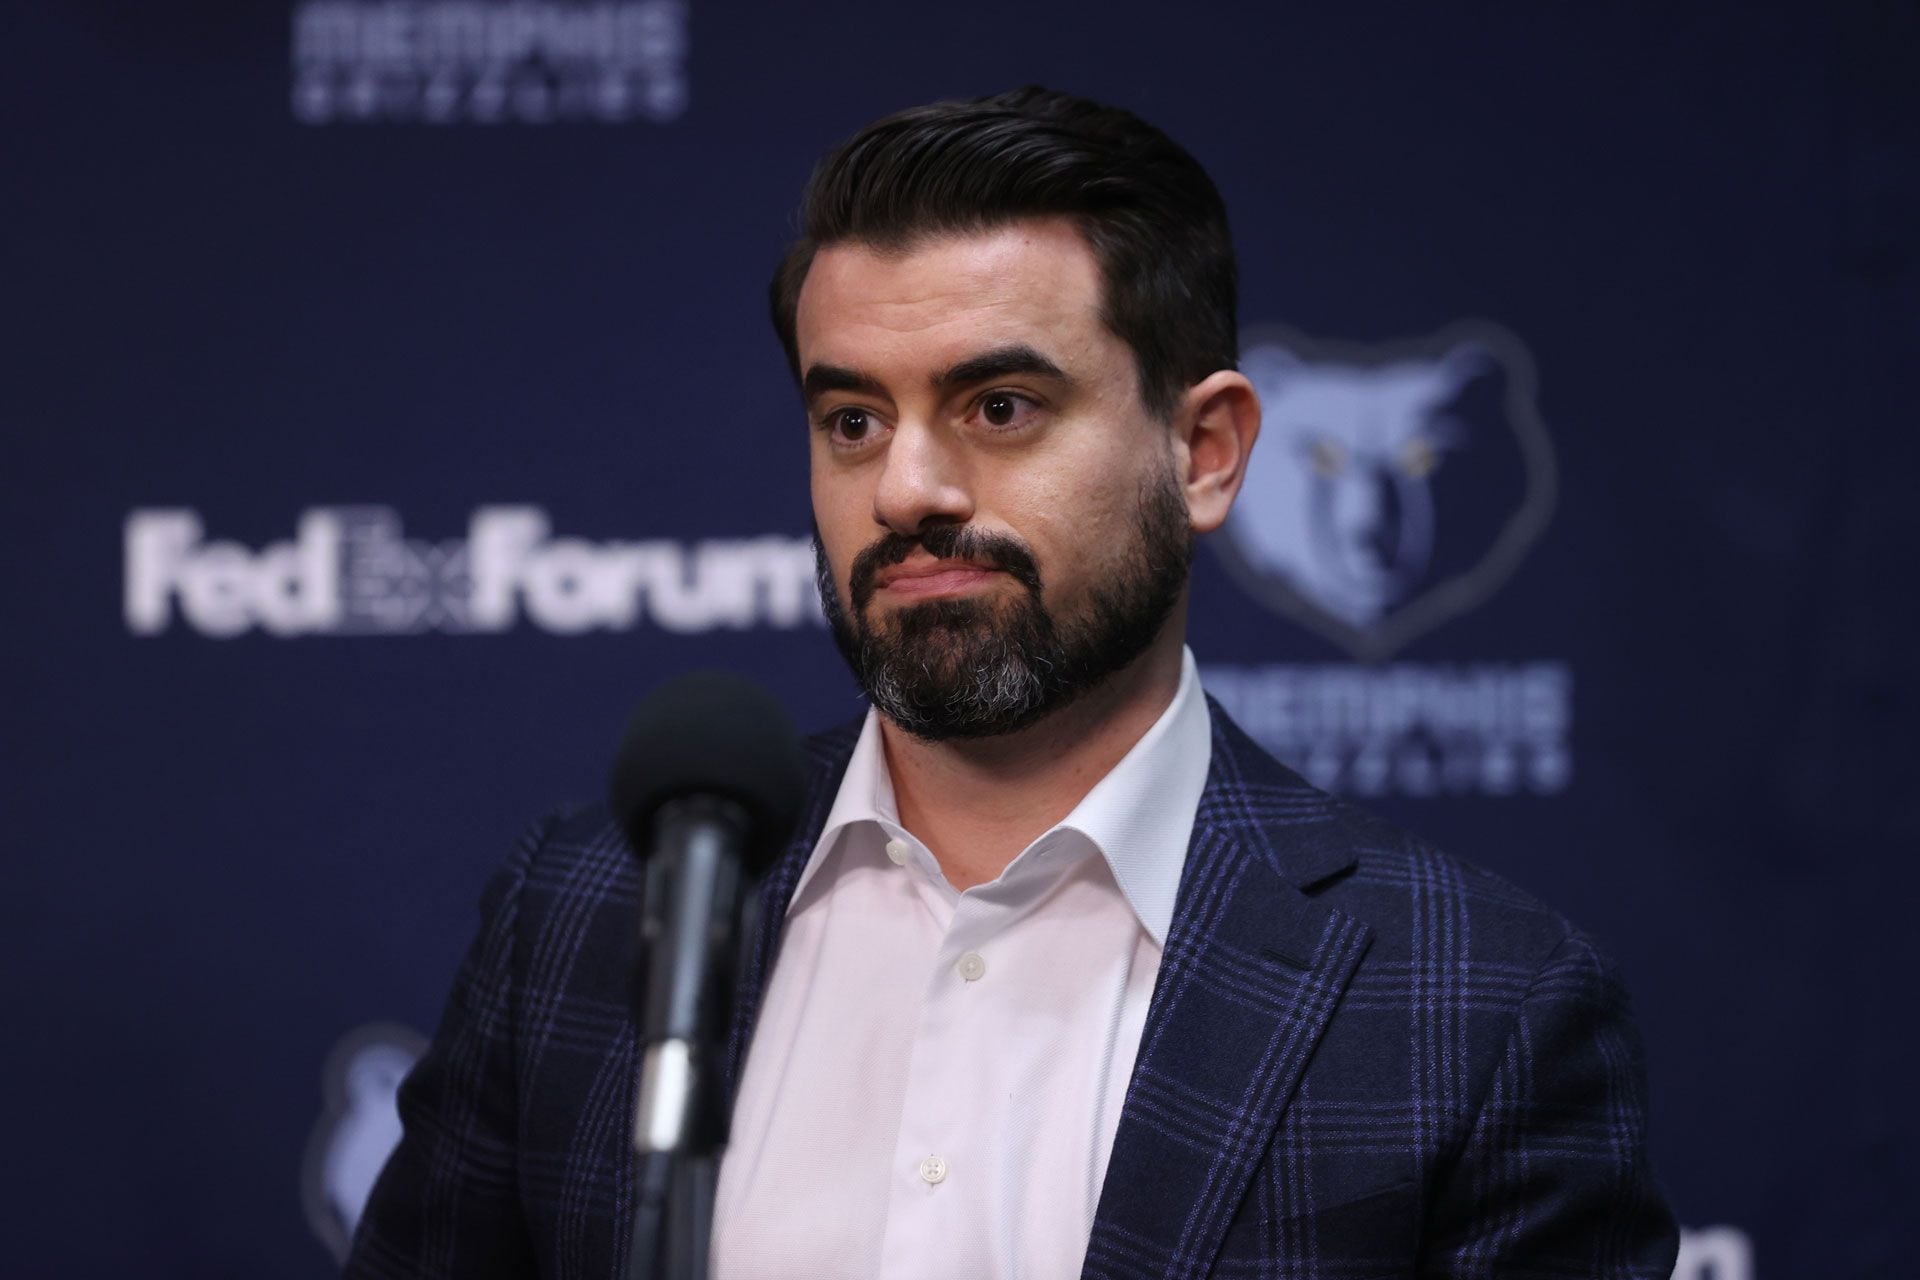 MEMPHIS, TN - June 24: Zach Kleiman, General Manager and Executive Vice President of Basketball Operation of the Memphis Grizzlies talks to the media during the introductory draft press conference on June 24, 2022 at FedExForum in Memphis, Tennessee.